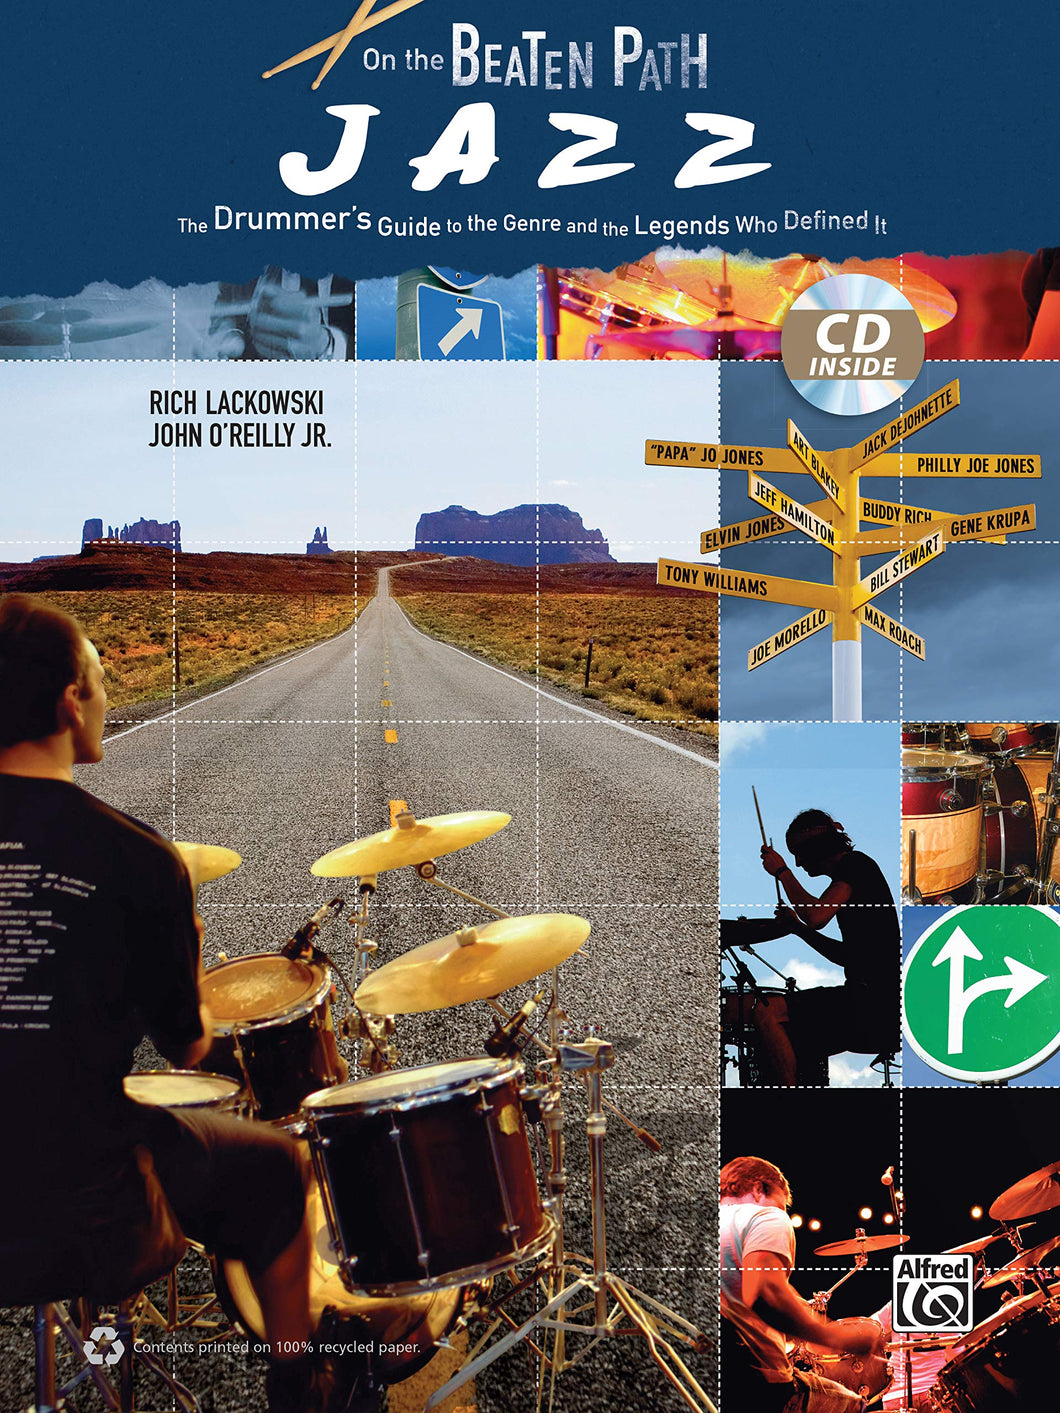 On the Beaten Path: Jazz - The Drummer's Guide to the Genre and